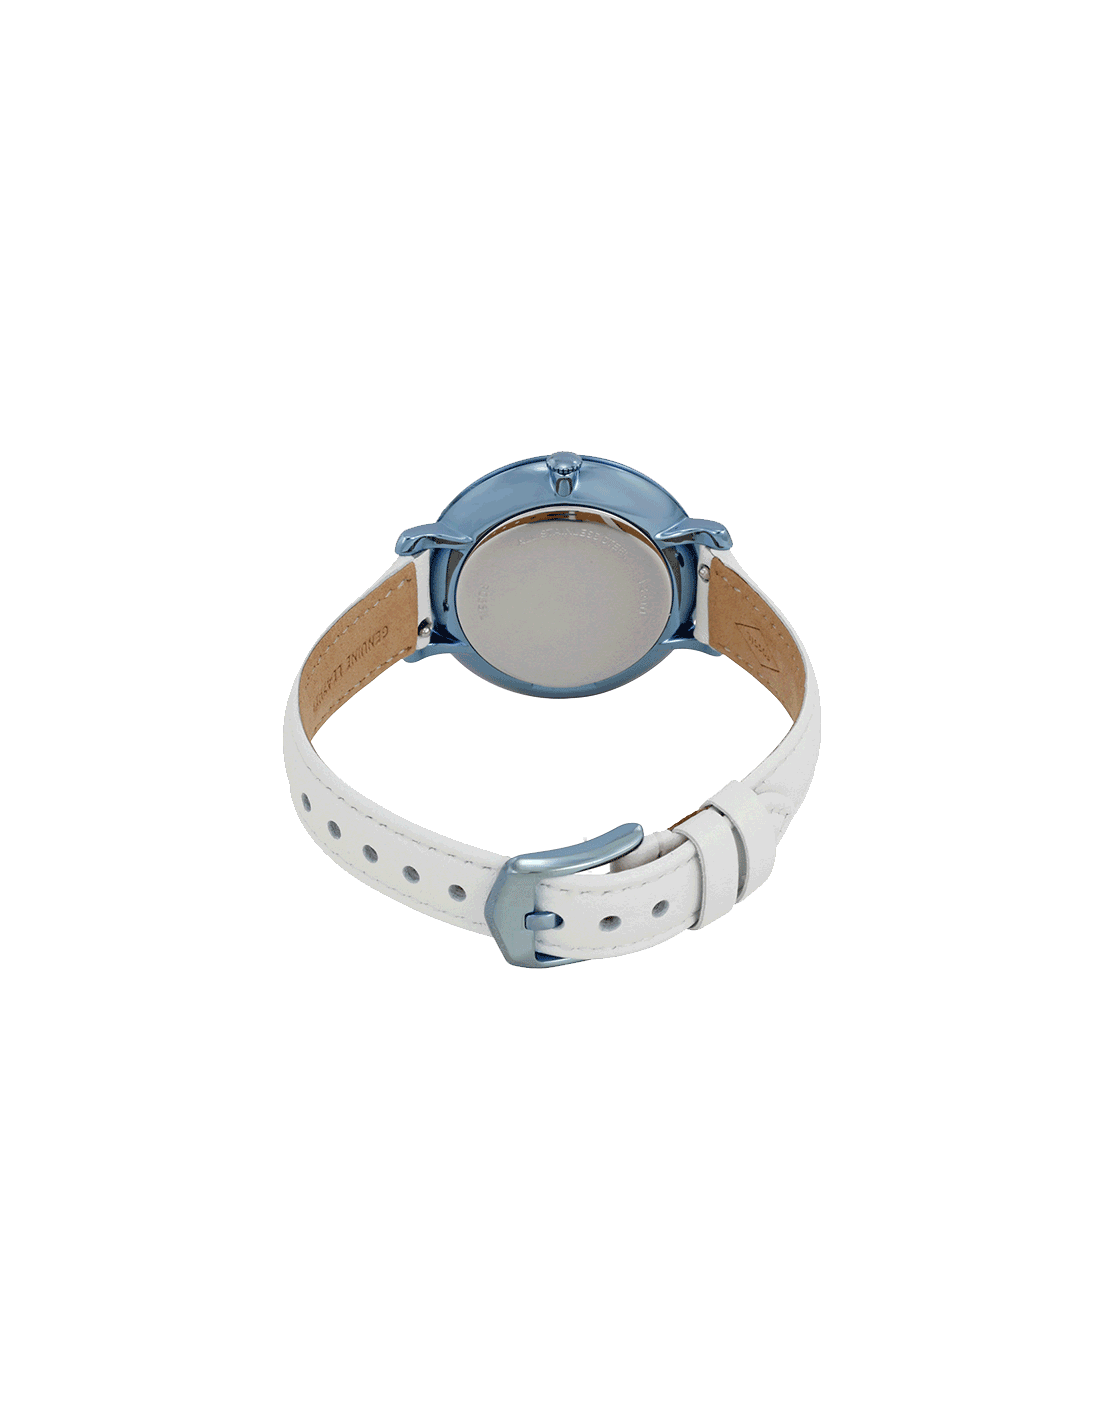 Ladies Jacqueline Watch (White/Blue) | Fossil | Luby 